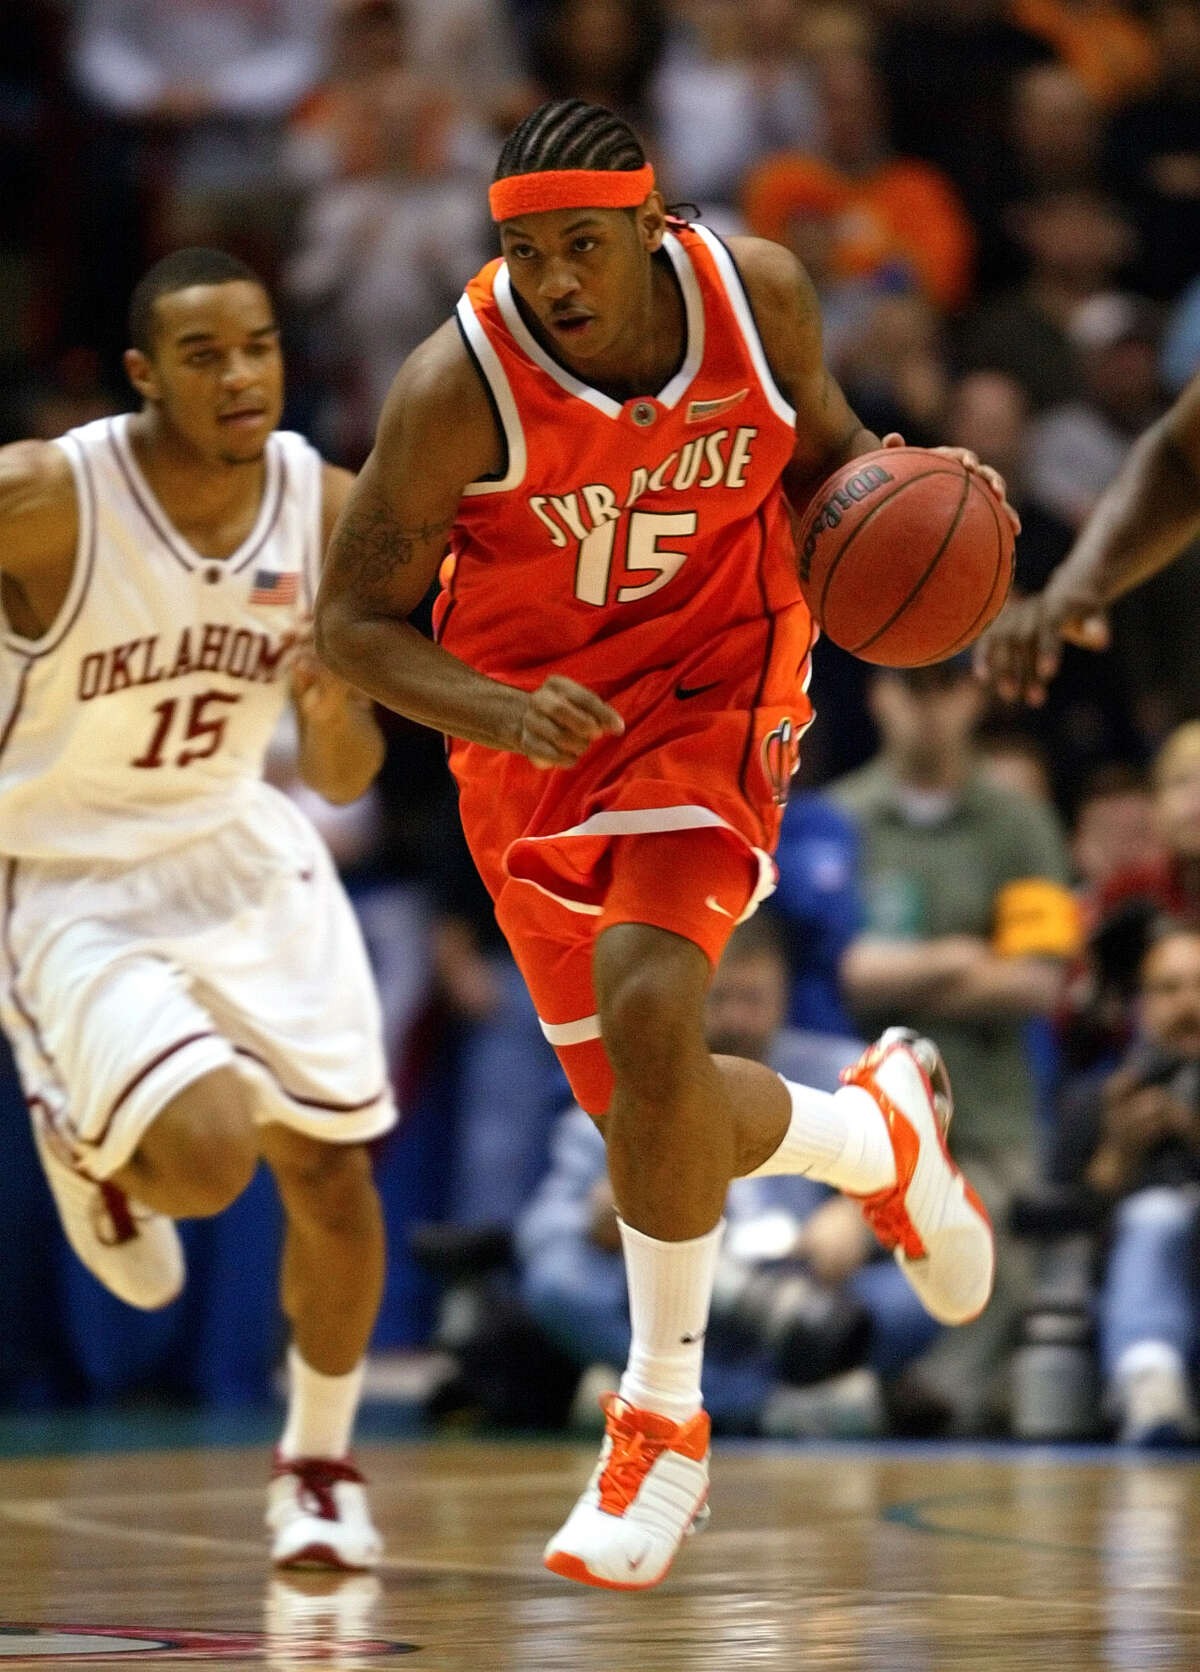 The Times Union Center was host to NCAA Championship events an impressive four consecutive years, and seven events in the new millennium. Syracuse's Carmelo Anthony dribbles the ball upcourt as Oklahoma's De'Angelo Alexander, left, chases during the NCAA men's basketball east regional final in this March 30, 2003. Anthony, who led the Orangemen to their first national championship, says he will forego his final three years of school to play in the National Basketball Association, he announced on Thursday, April 24, 2003.